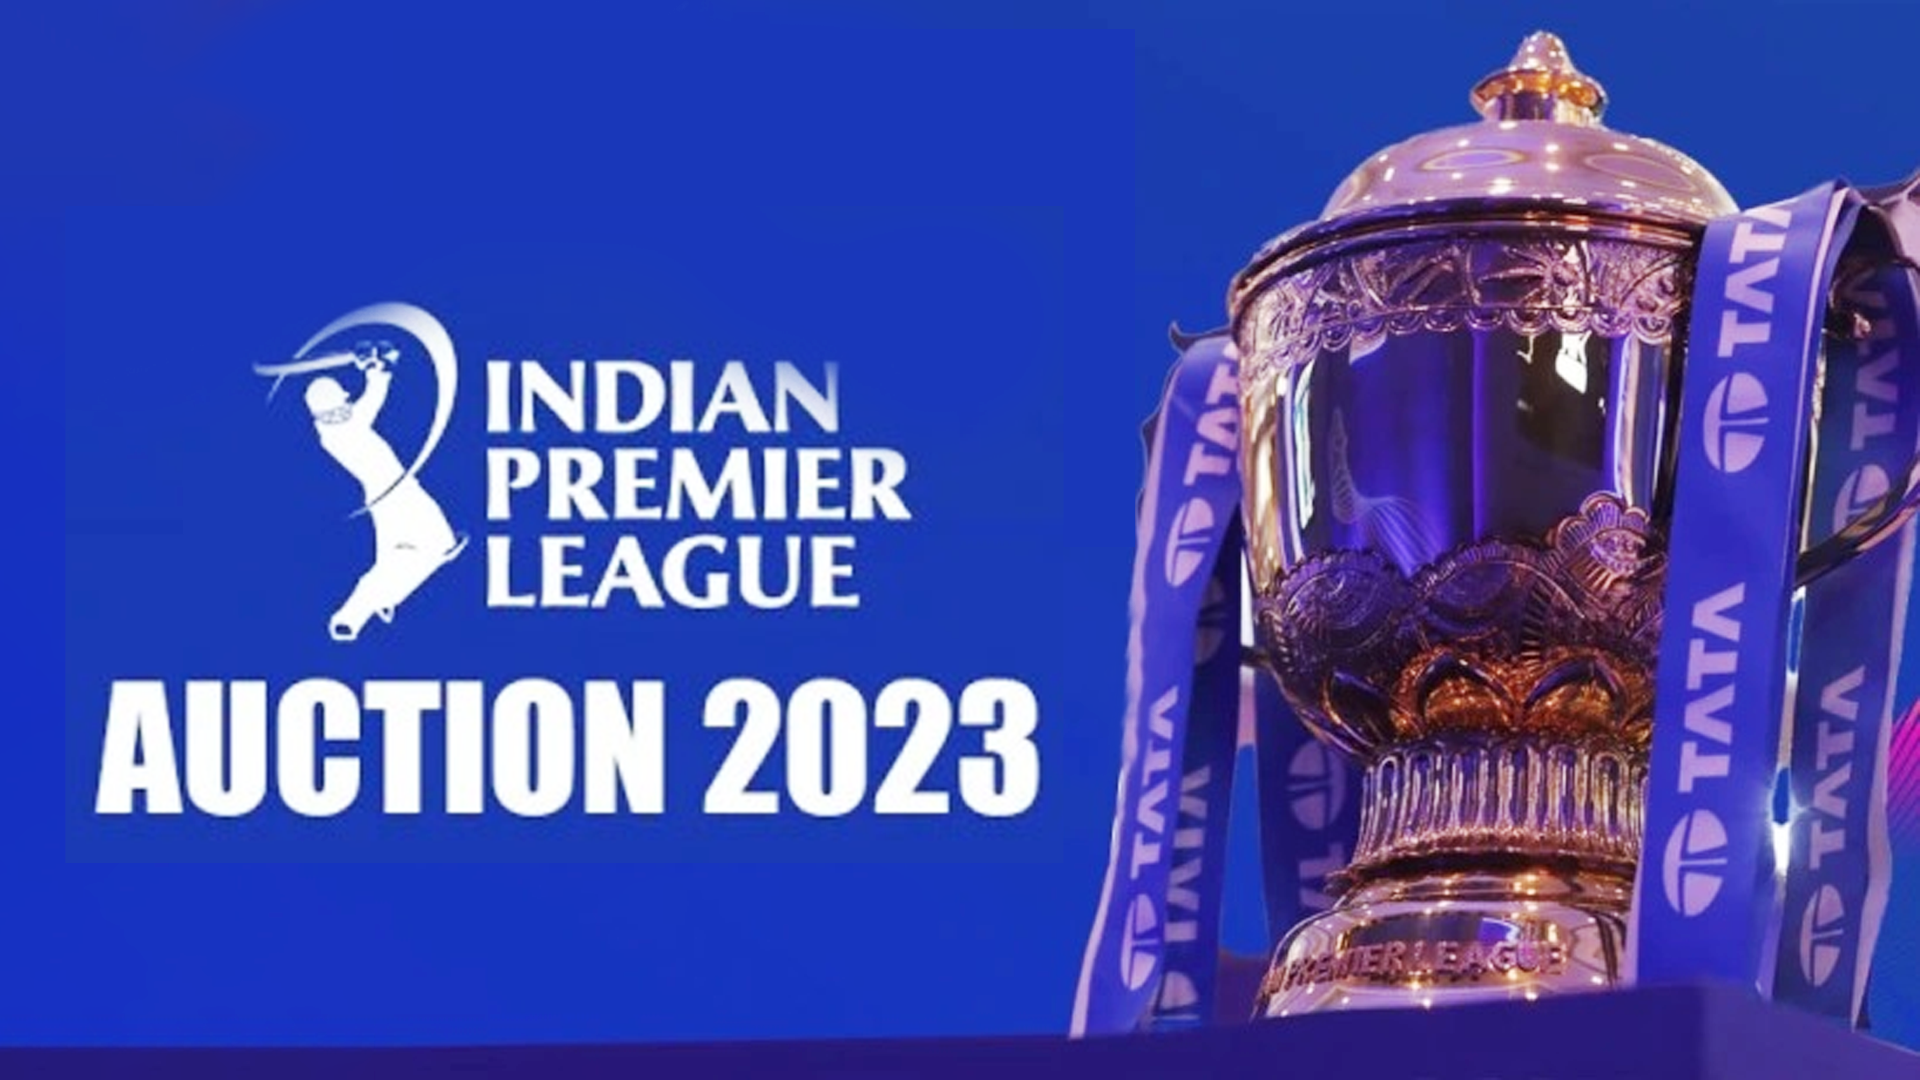 IPL 2023 Auction: 21 Players Register With The Base Price Of 2 Cr, Here Is The Full List Of Players With 2 Cr, 1.5 Cr, and 1 Cr Base Price